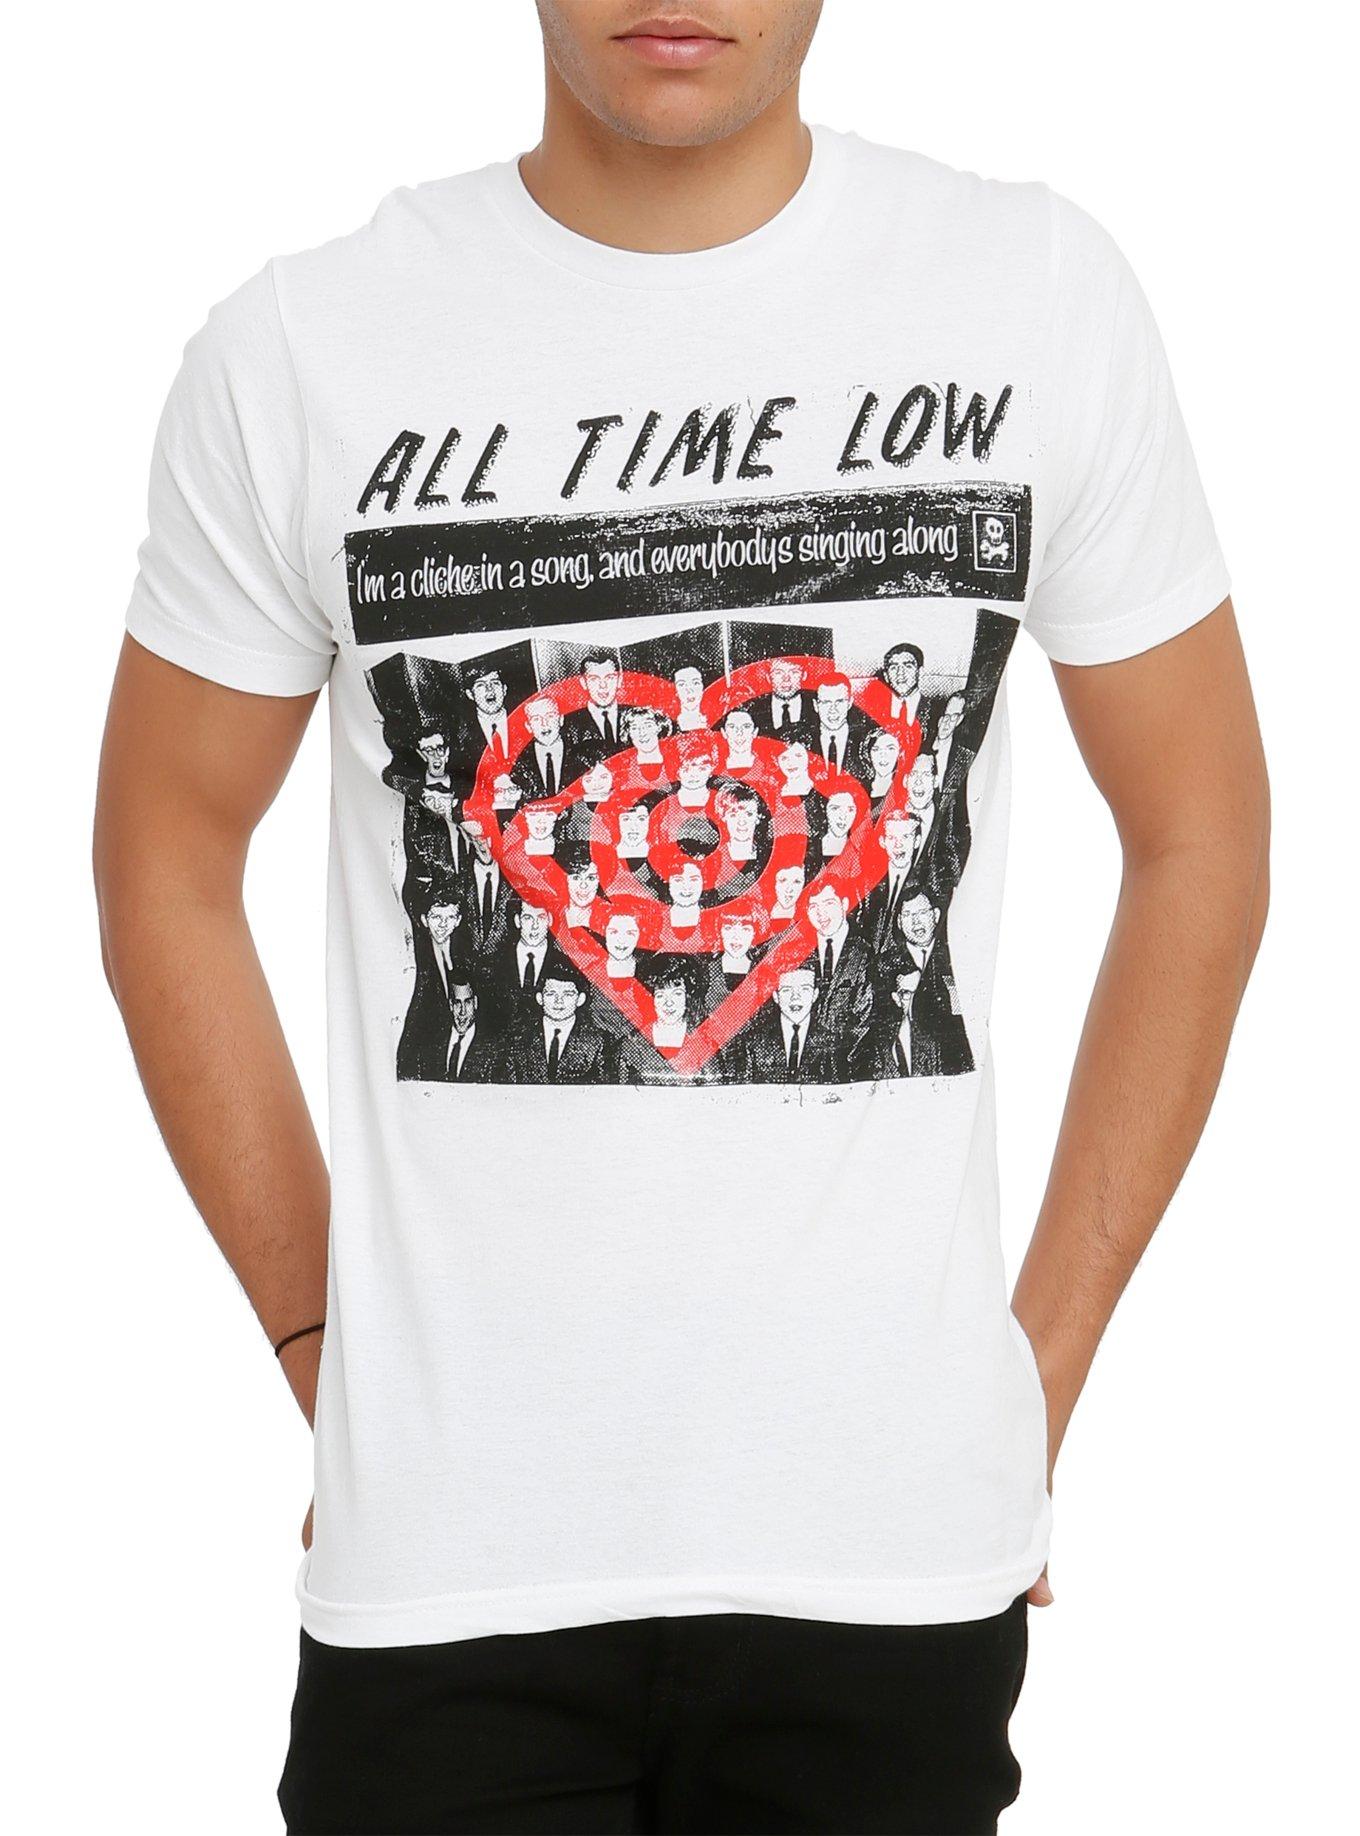 All Time Low Class Photo T-Shirt, WHITE, hi-res